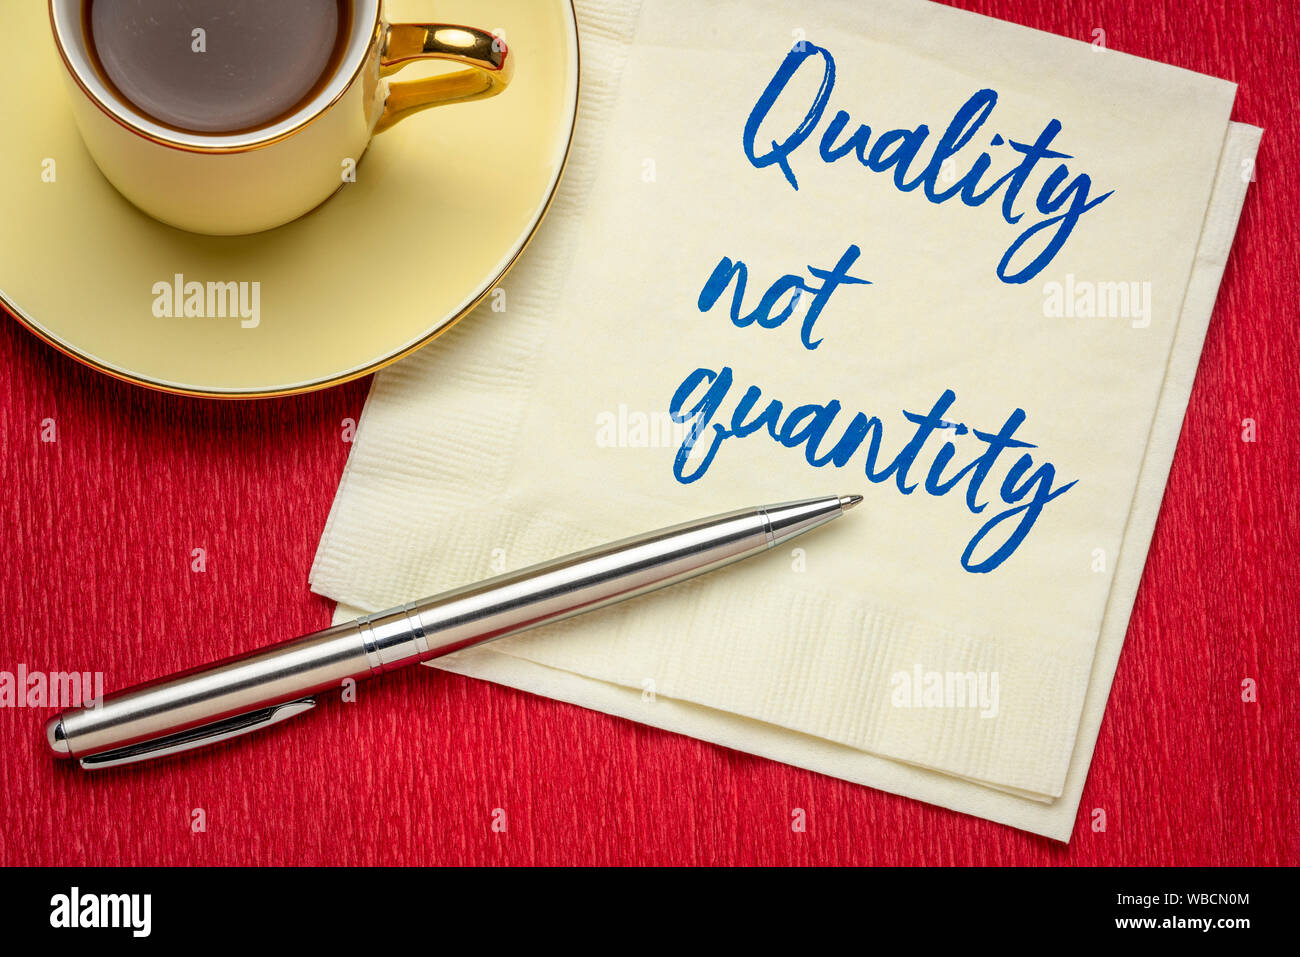 quality not quantity - inspirational handwriting on a npkin with a cup of coffee Stock Photo